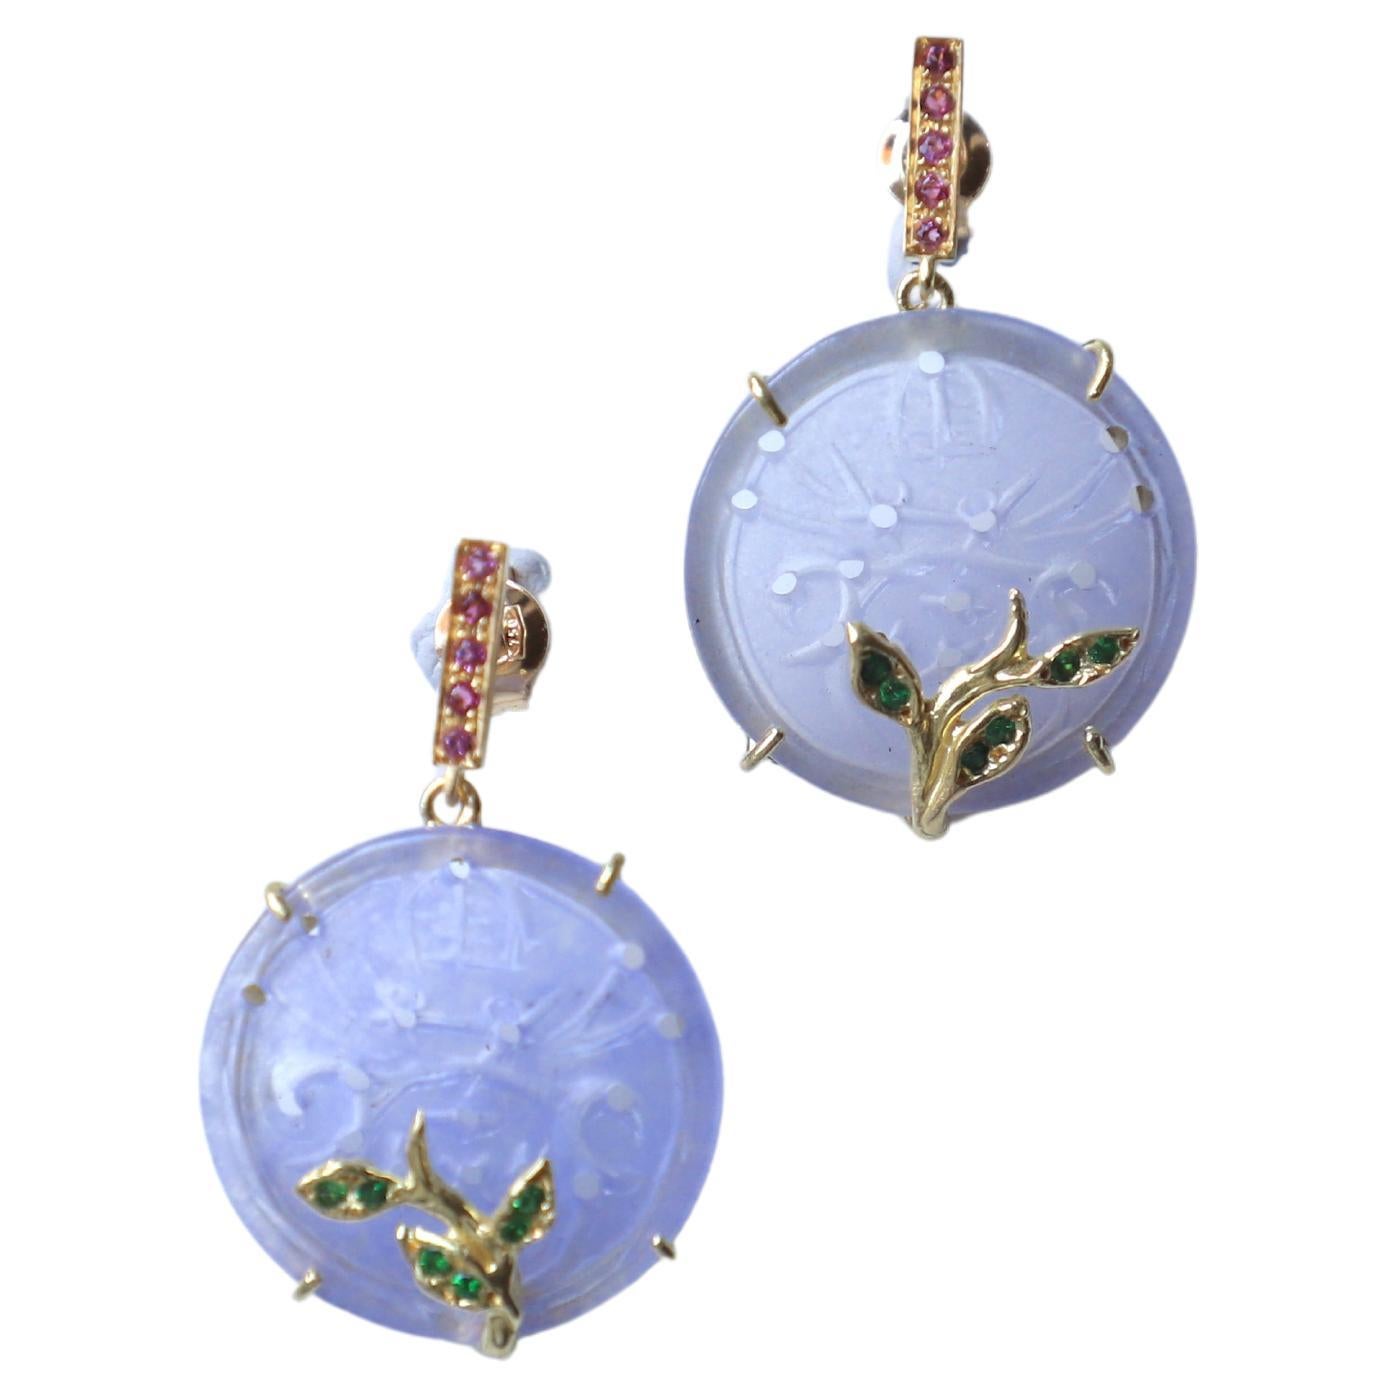 Rossella Ugolini 18K Gold Carved Rose Quartz Lilac Coin "Pansy Flower" Earrings For Sale